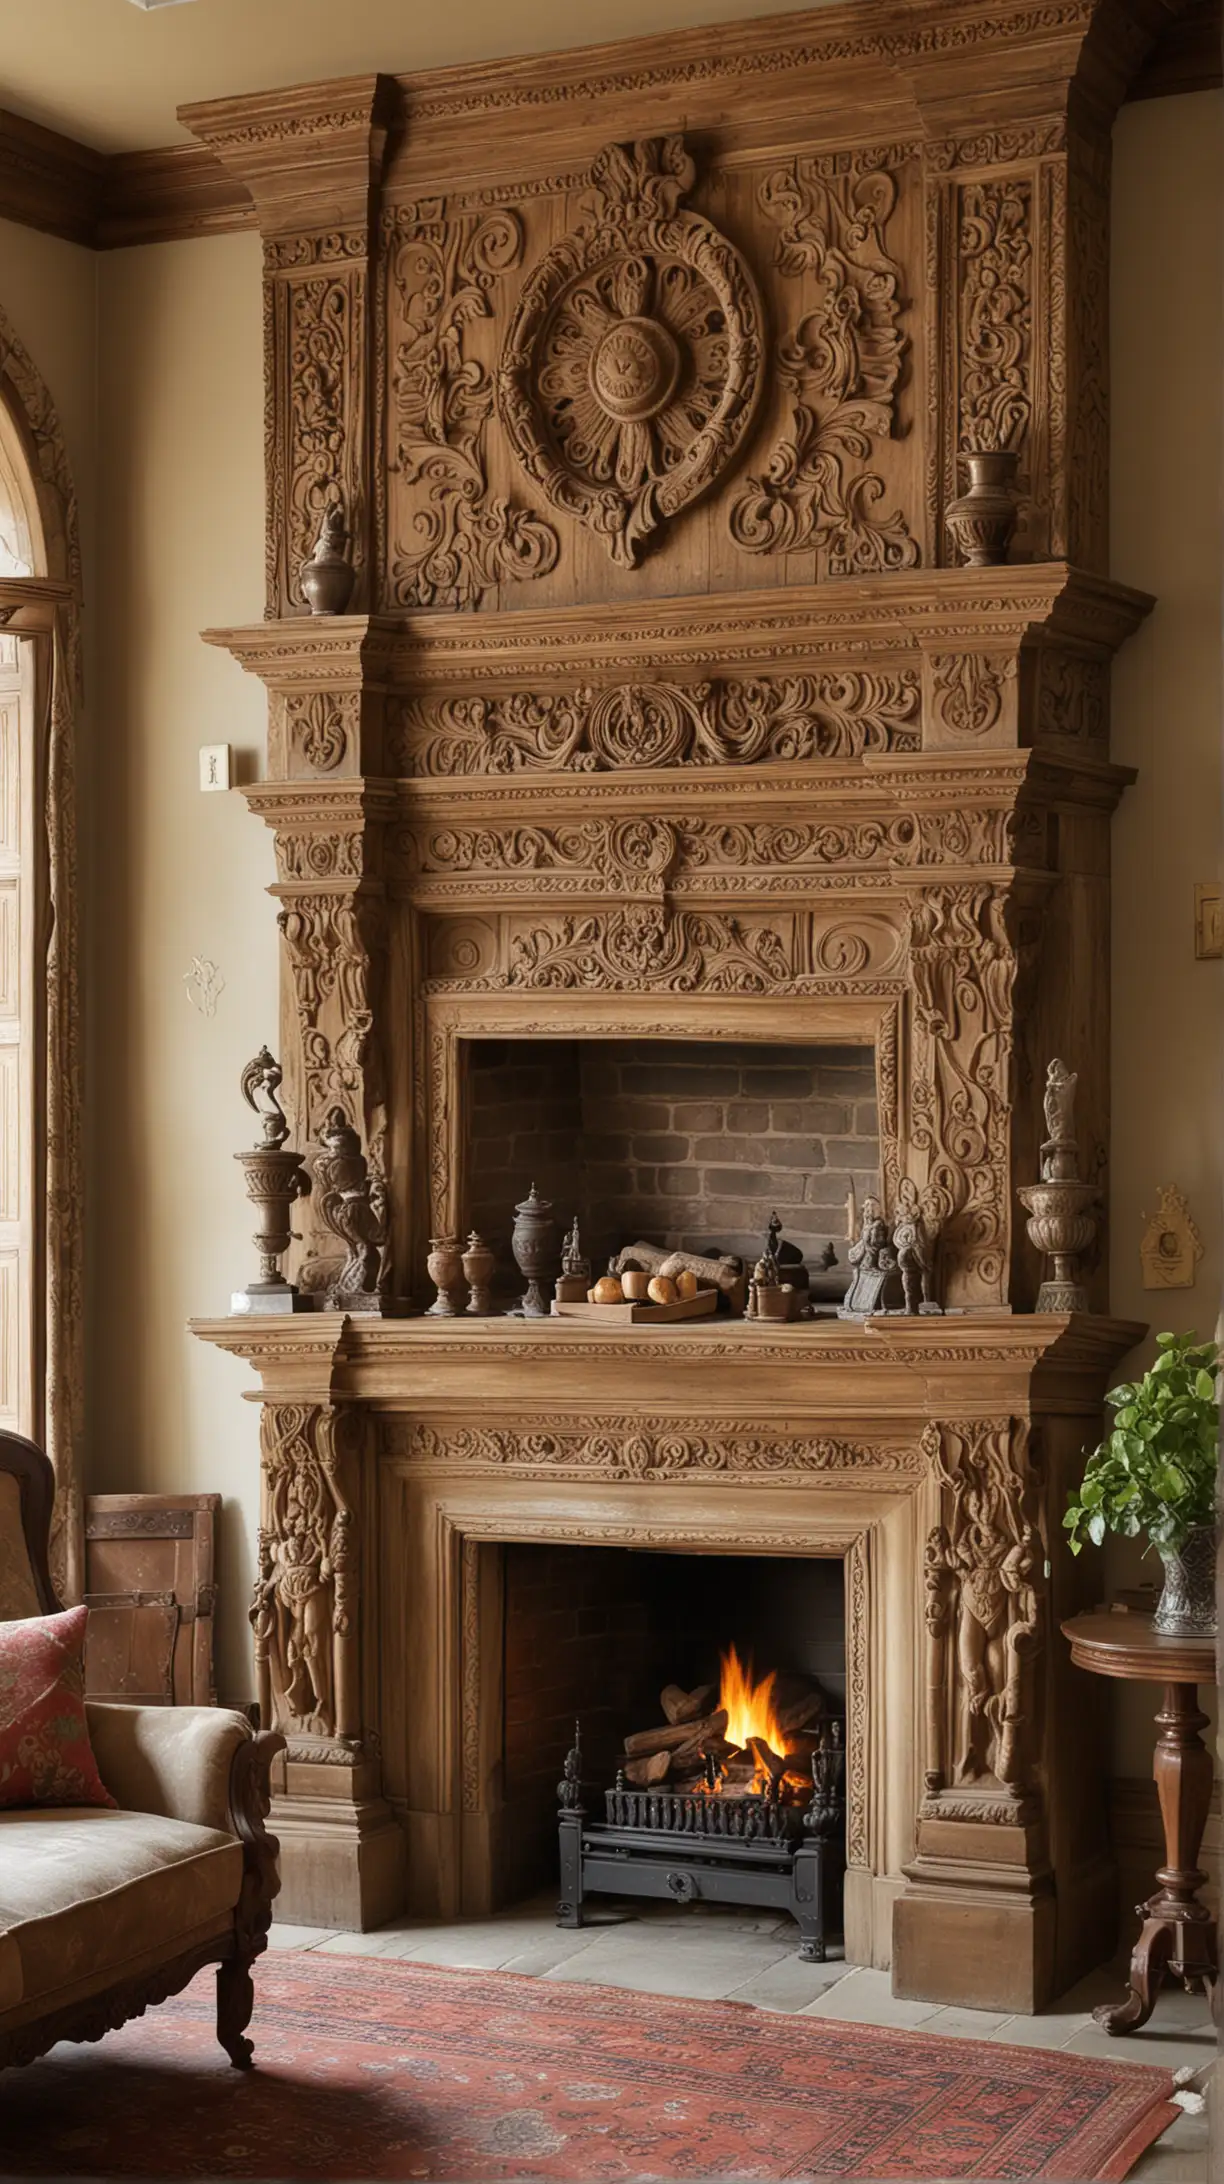 Antique living room featuring a traditional fireplace with vintage wood mantelpiece and ornamental carvings, evoking old-world charm.